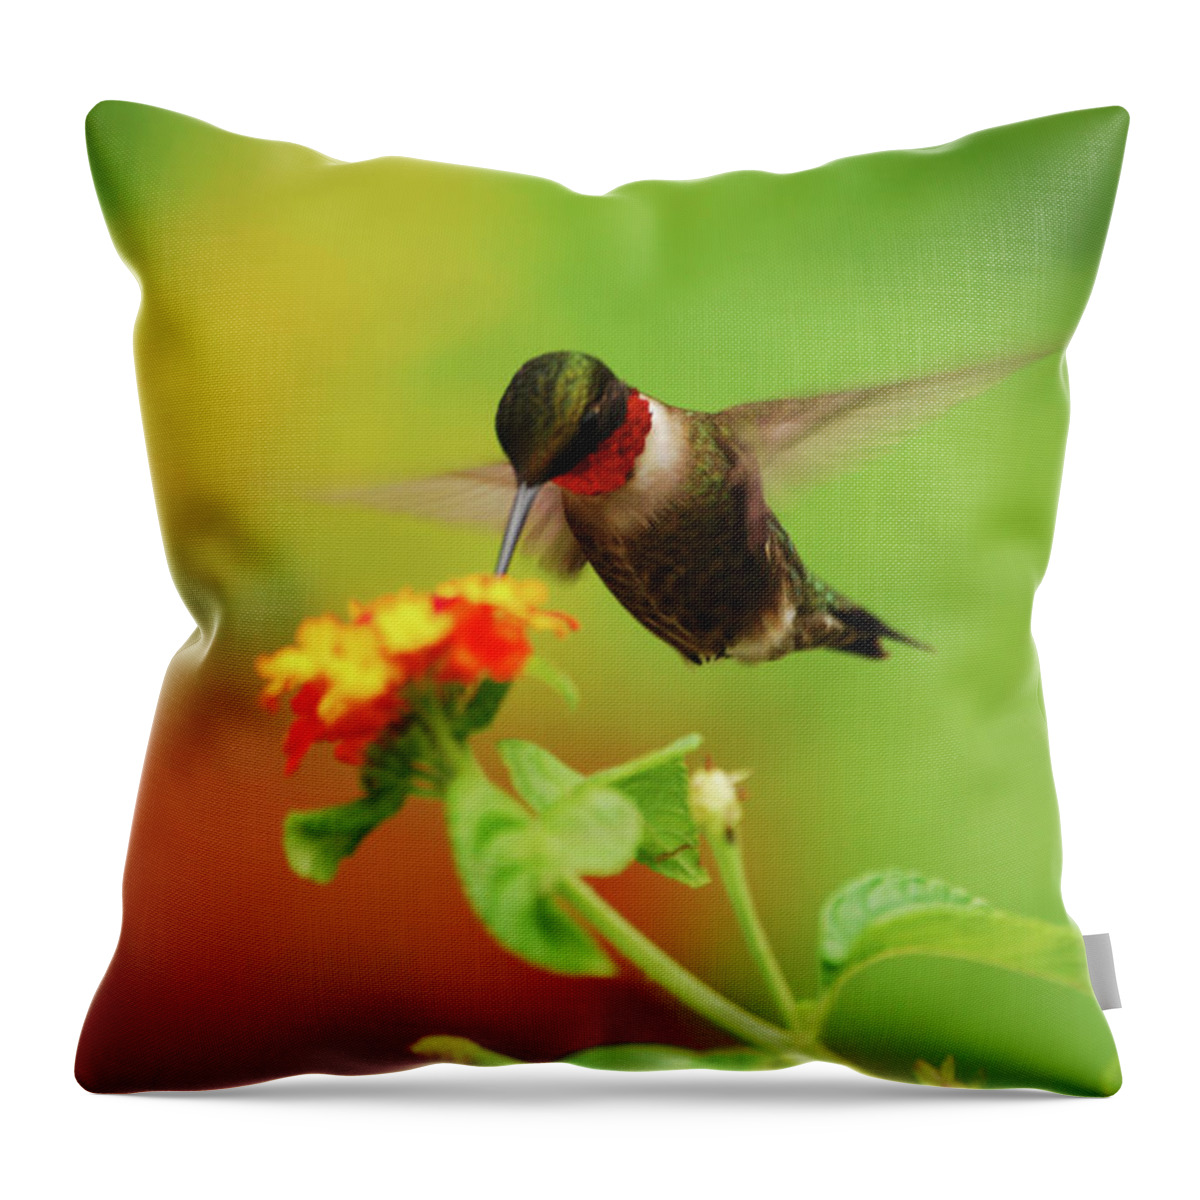 Hummingbird Throw Pillow featuring the photograph Pretty As A Picture by Lori Tambakis